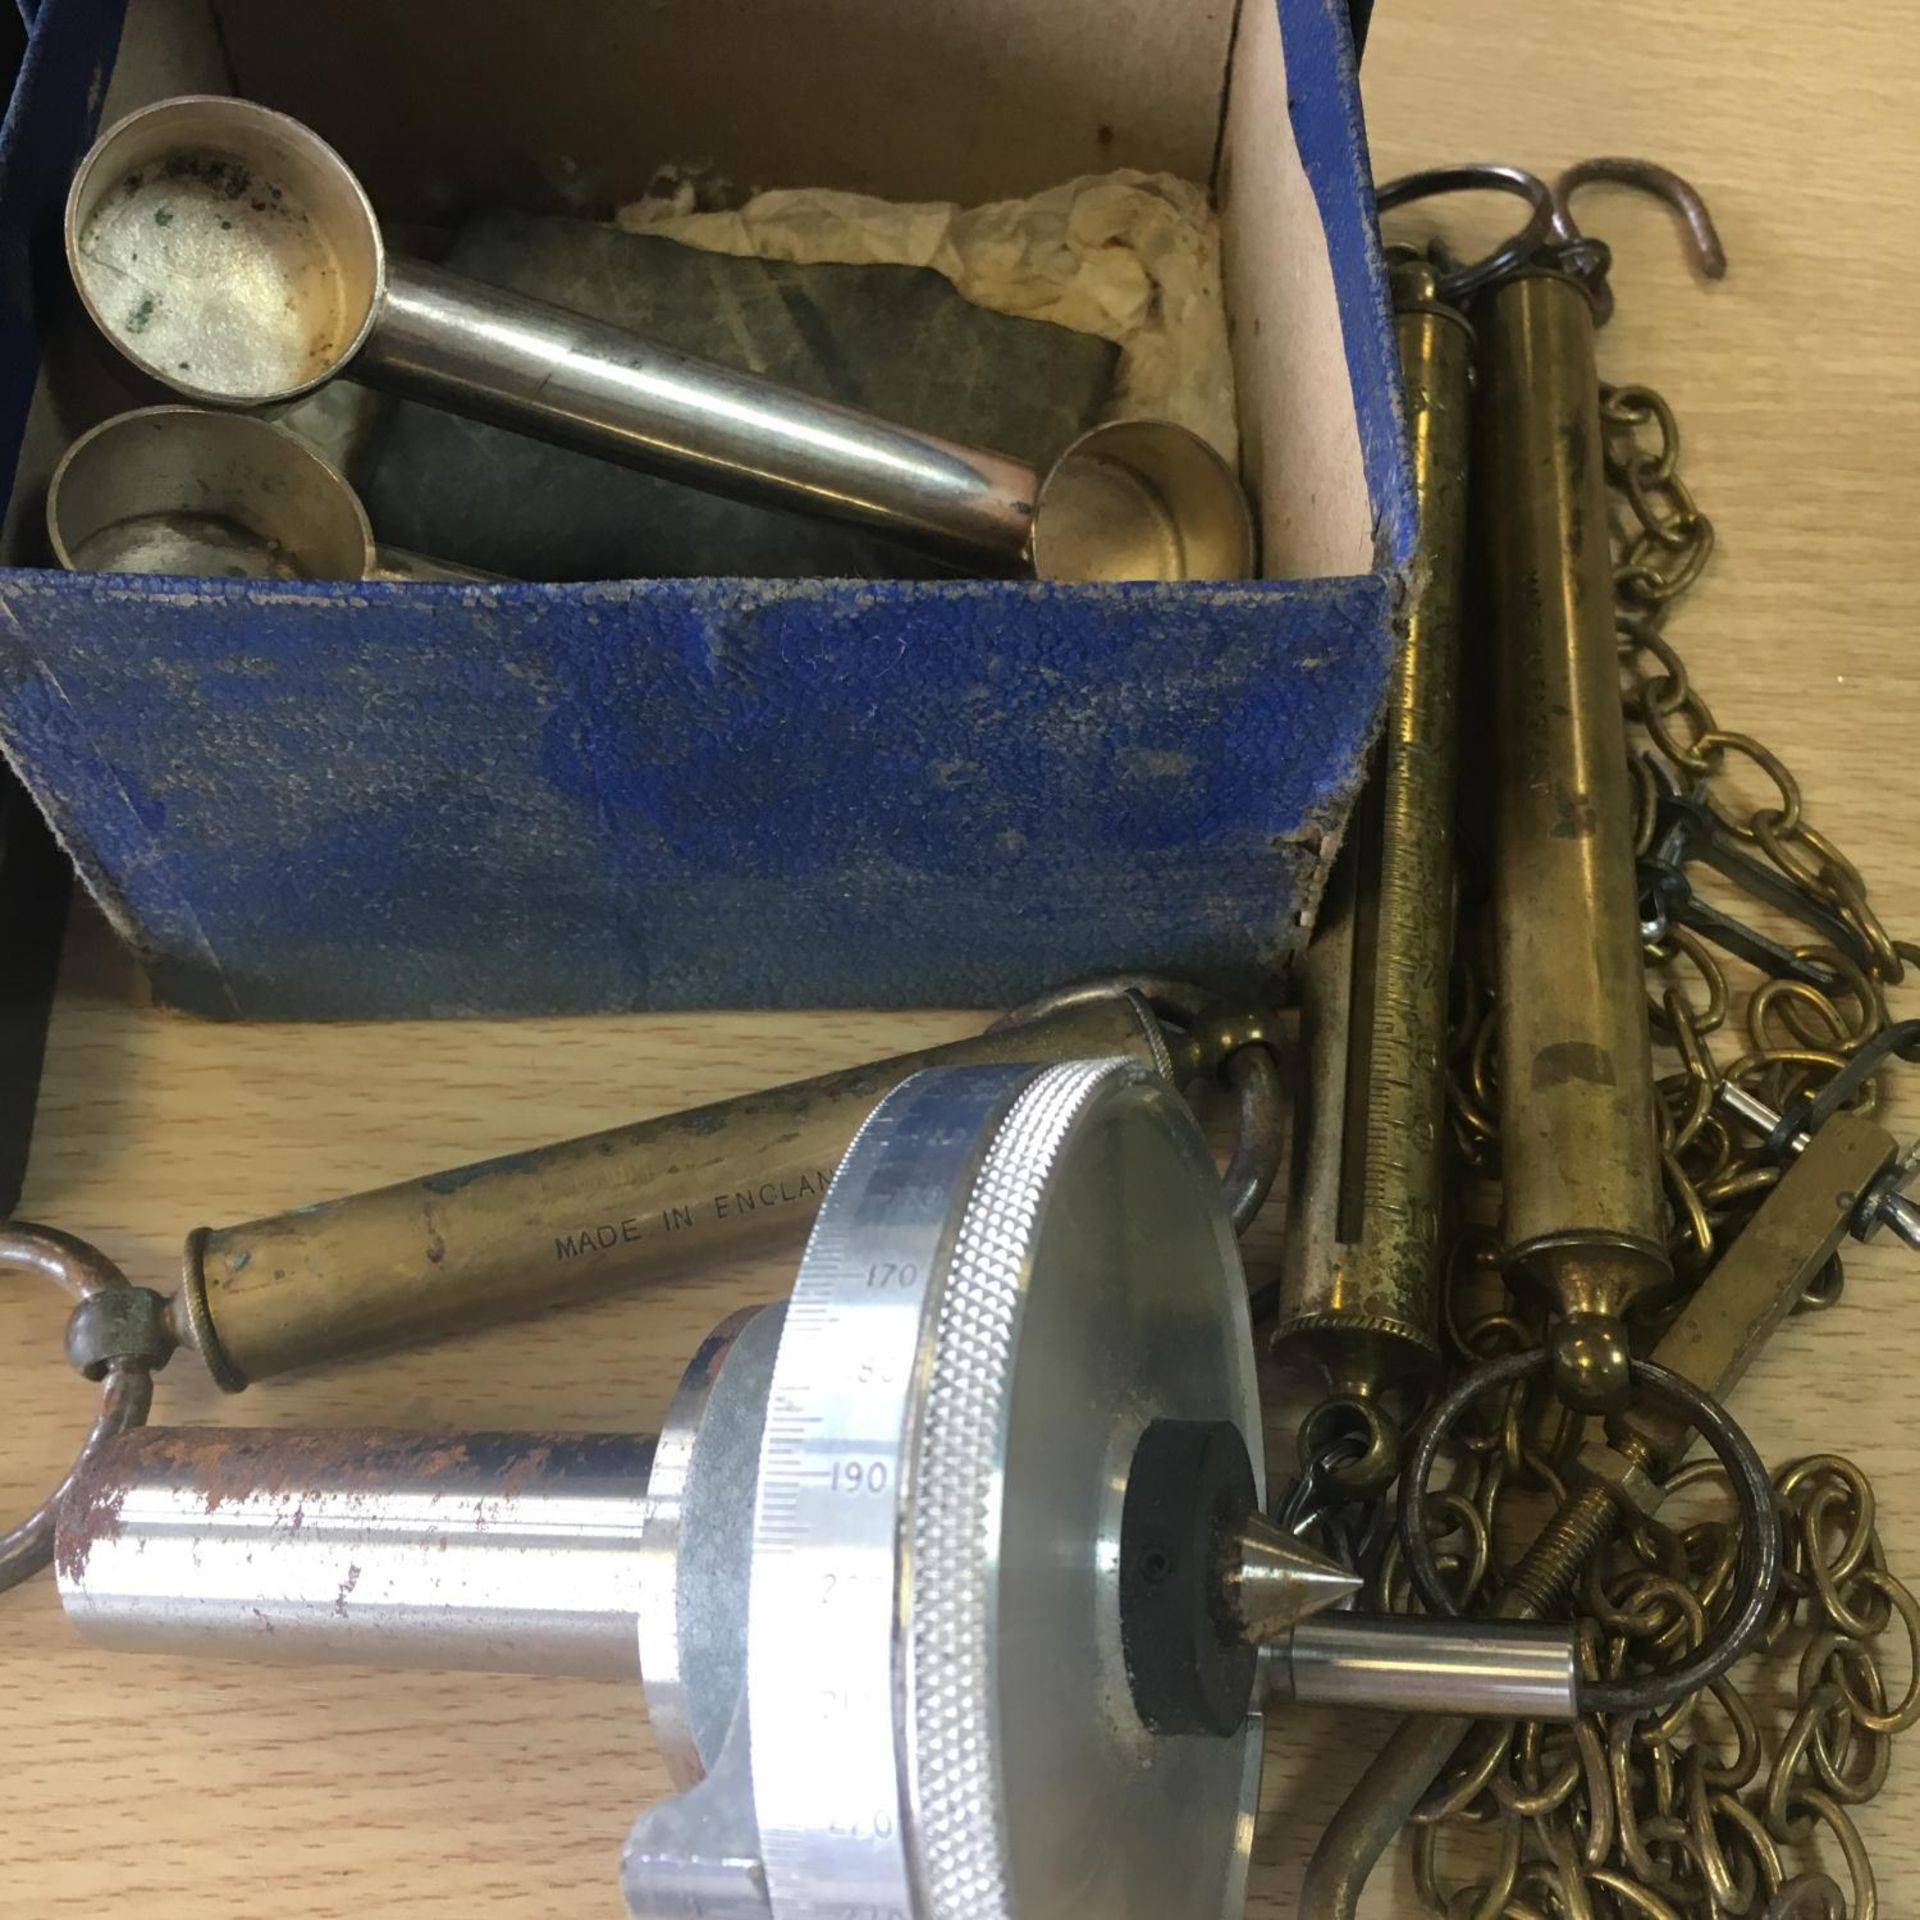 GROUP OF VINTAGE JEWELLERS ITEMS. To include Gemtek Diamond Detector, boxed set of weights and - Image 3 of 3